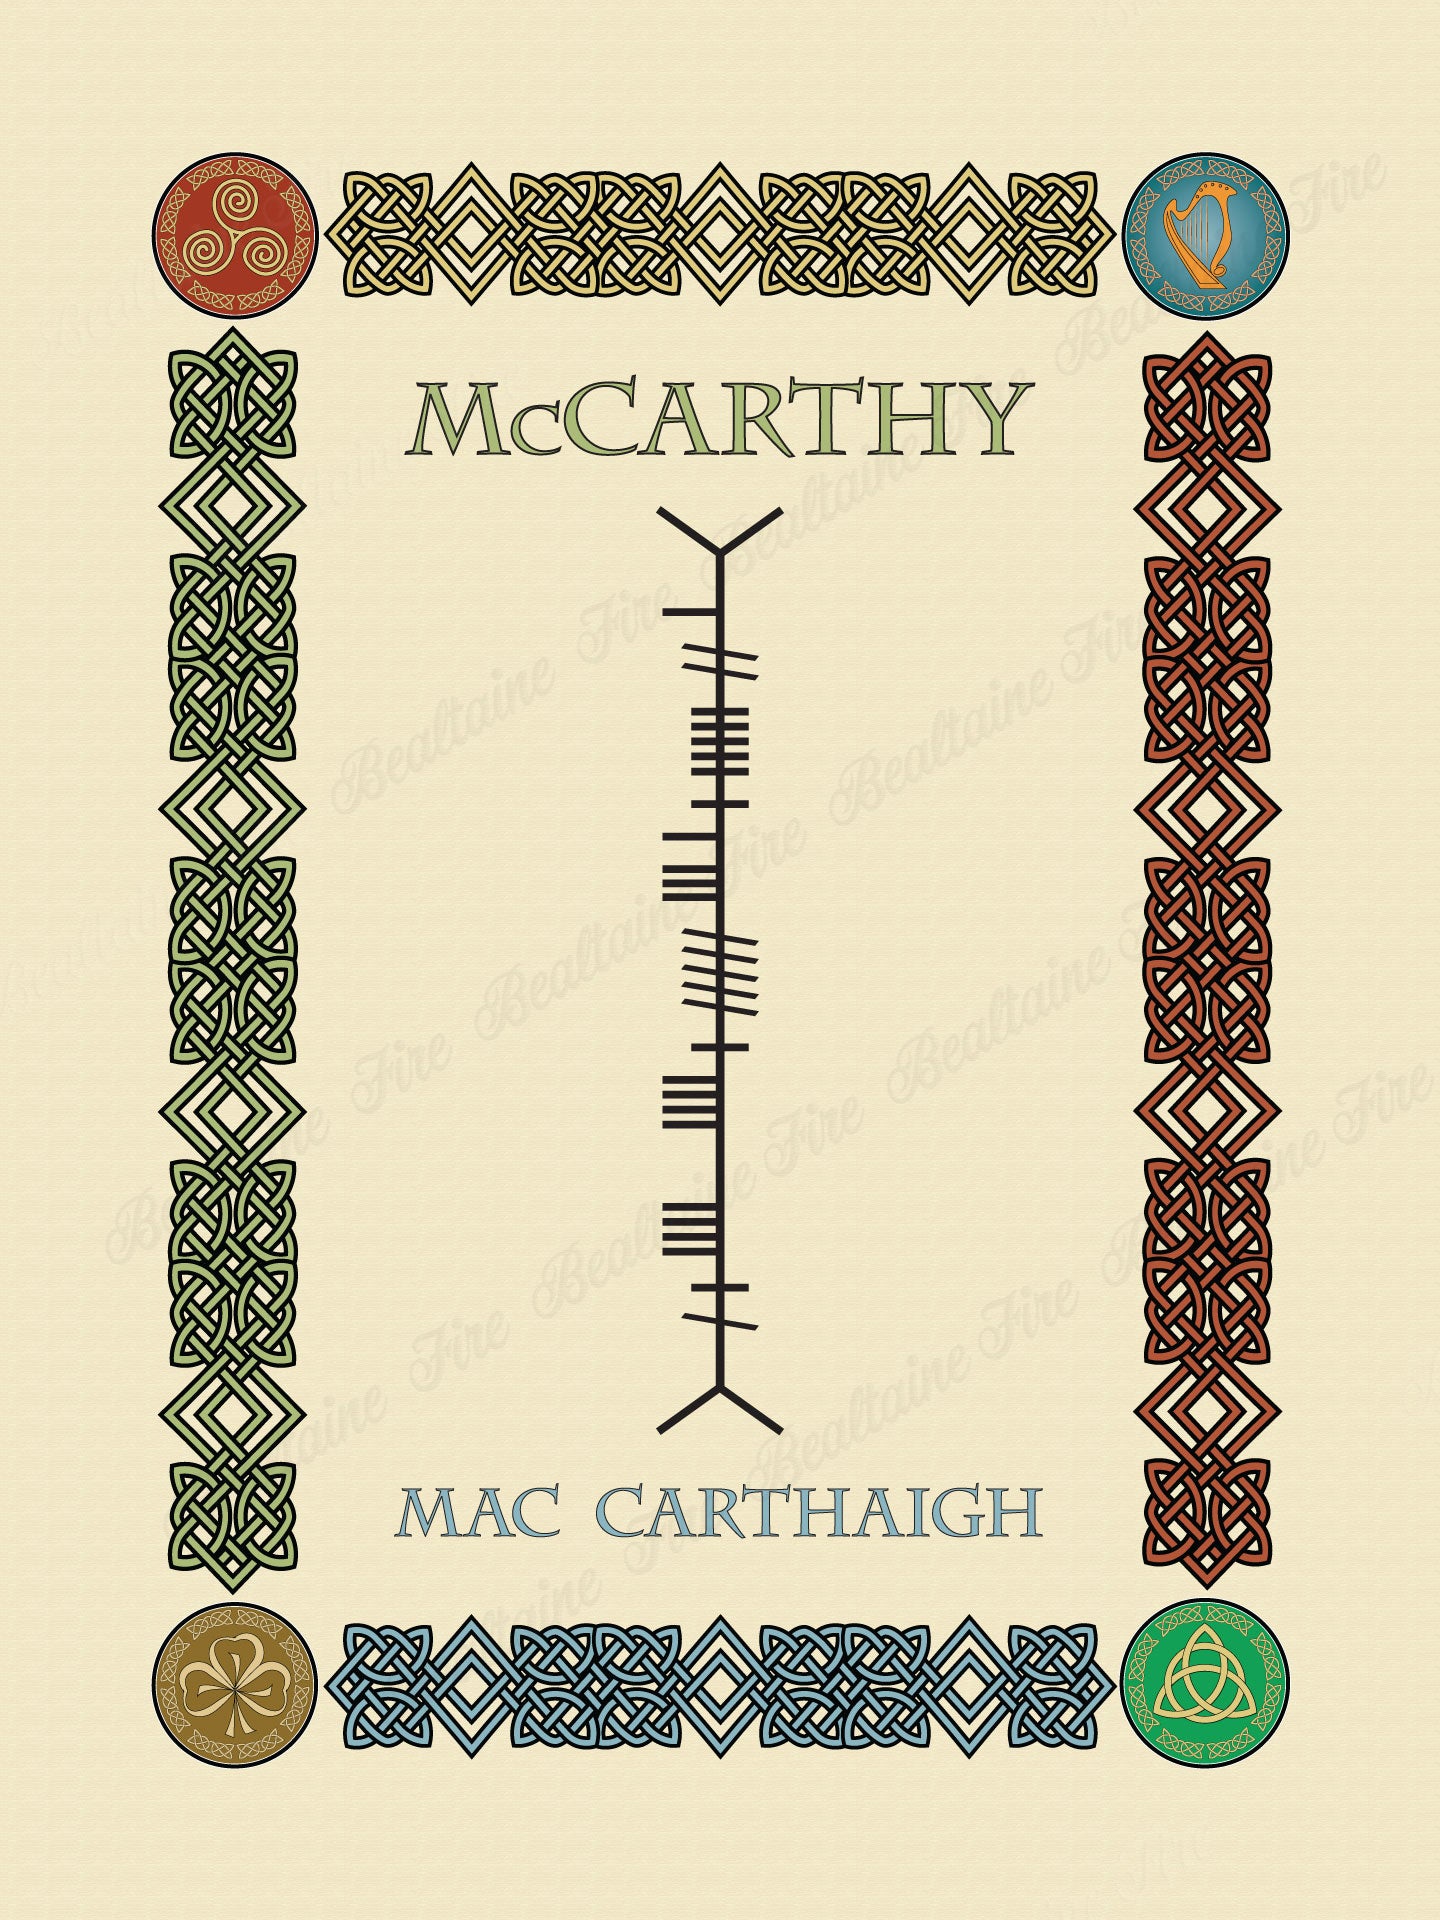 McCarthy in Old Irish and Ogham - Premium luster unframed print